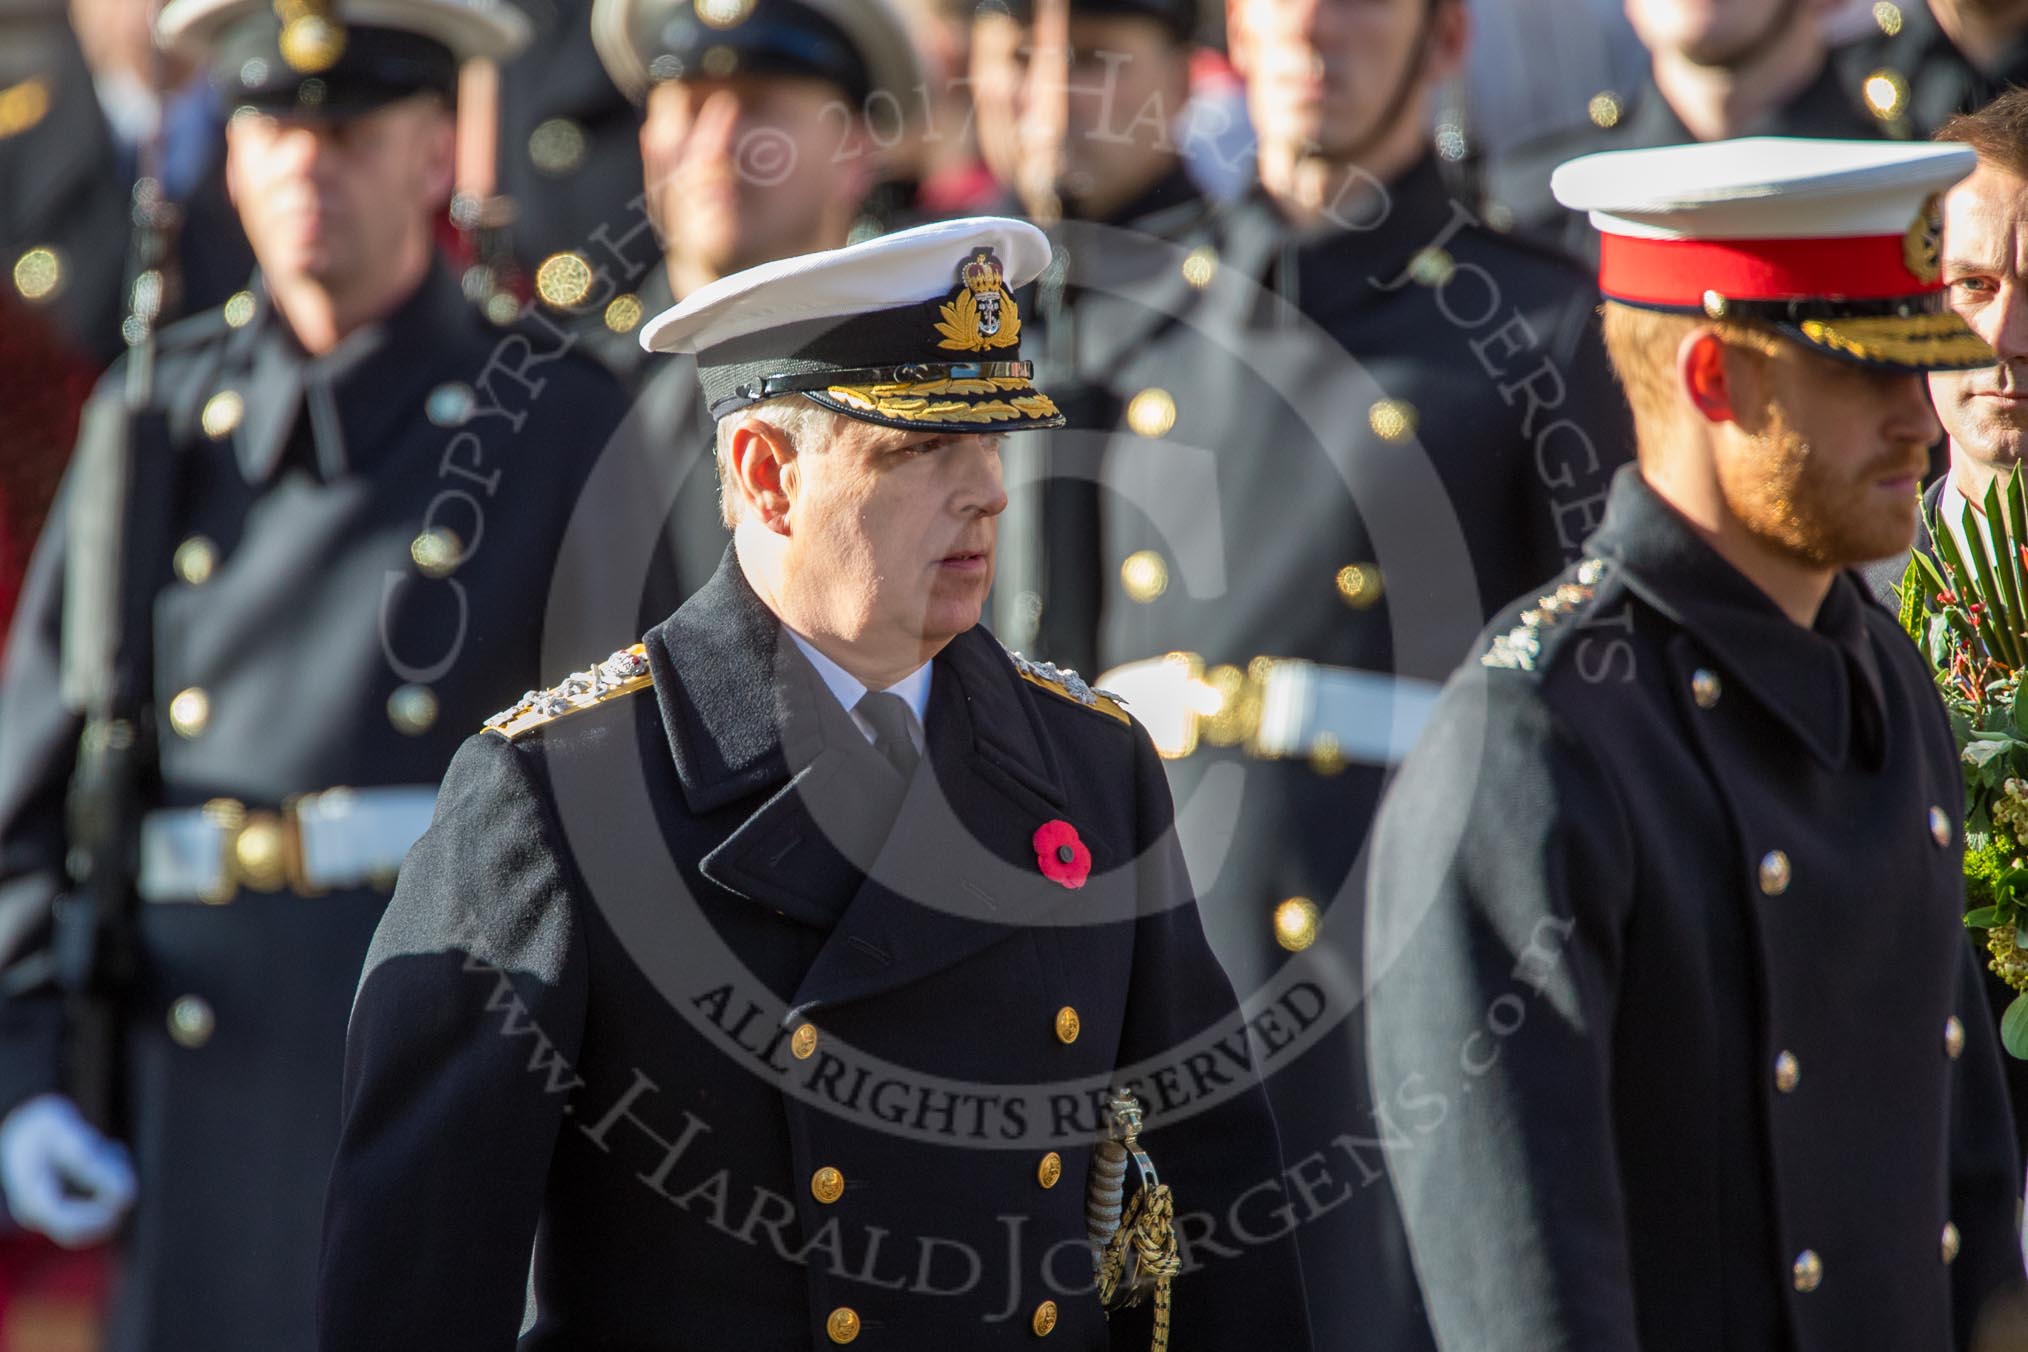 HRH The Duke of York (Prince Andrew) during the Remembrance Sunday Cenotaph Ceremony 2018 at Horse Guards Parade, Westminster, London, 11 November 2018, 10:59.